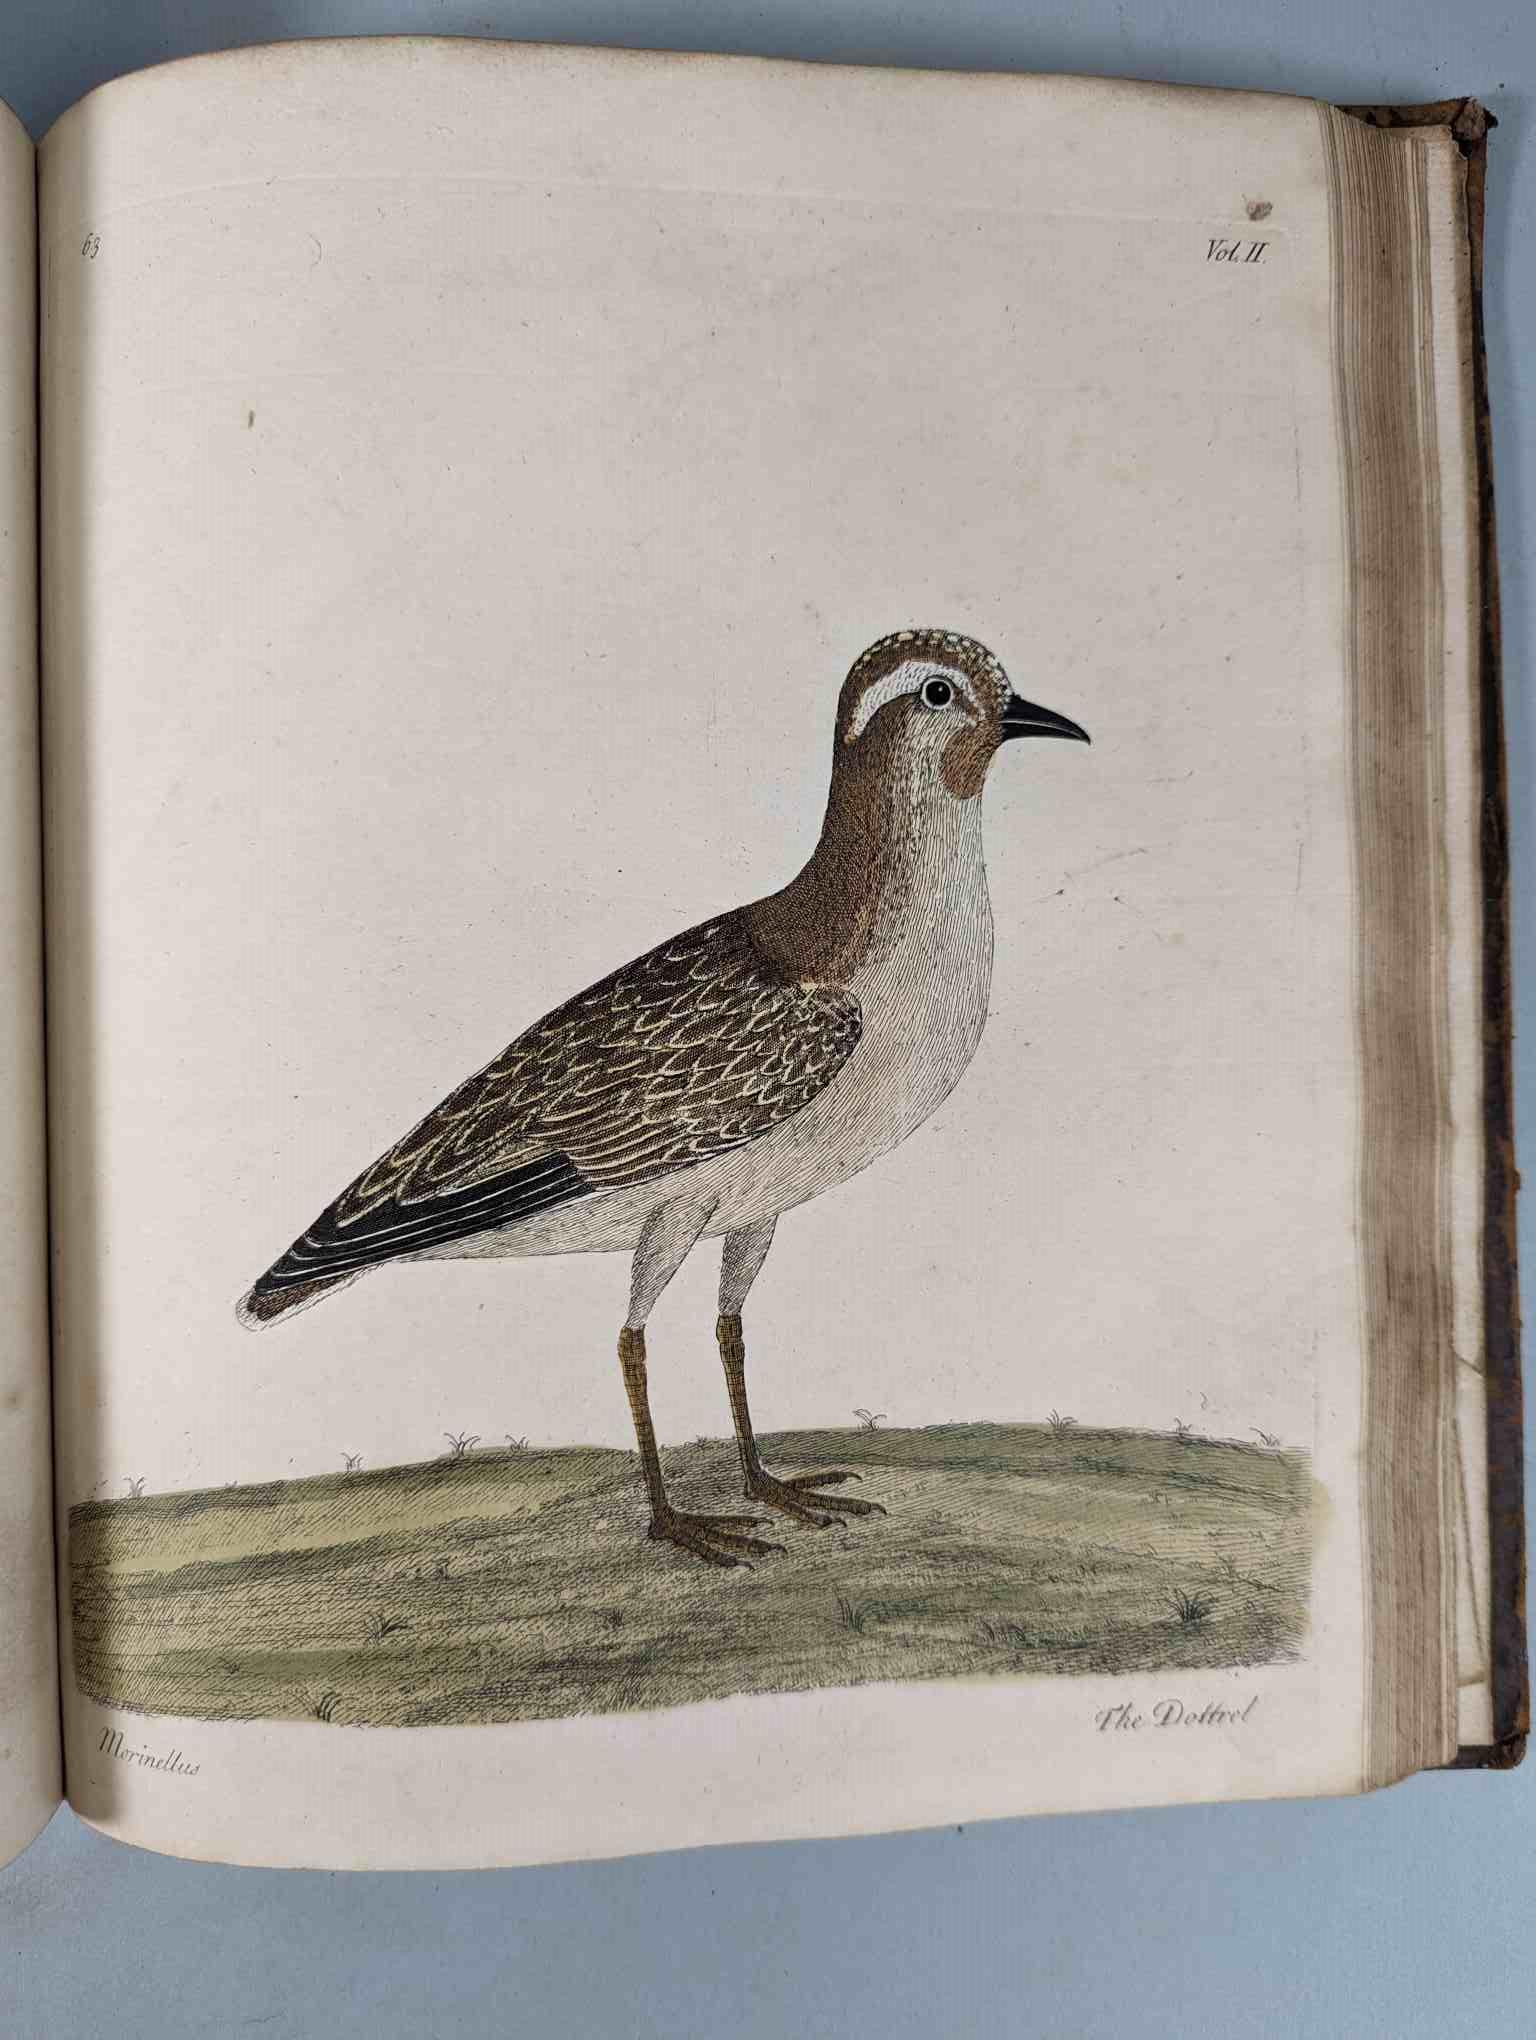 ALBIN, Eleazar. A Natural History of Birds, to which are added, Notes and Observations by W. - Image 167 of 208